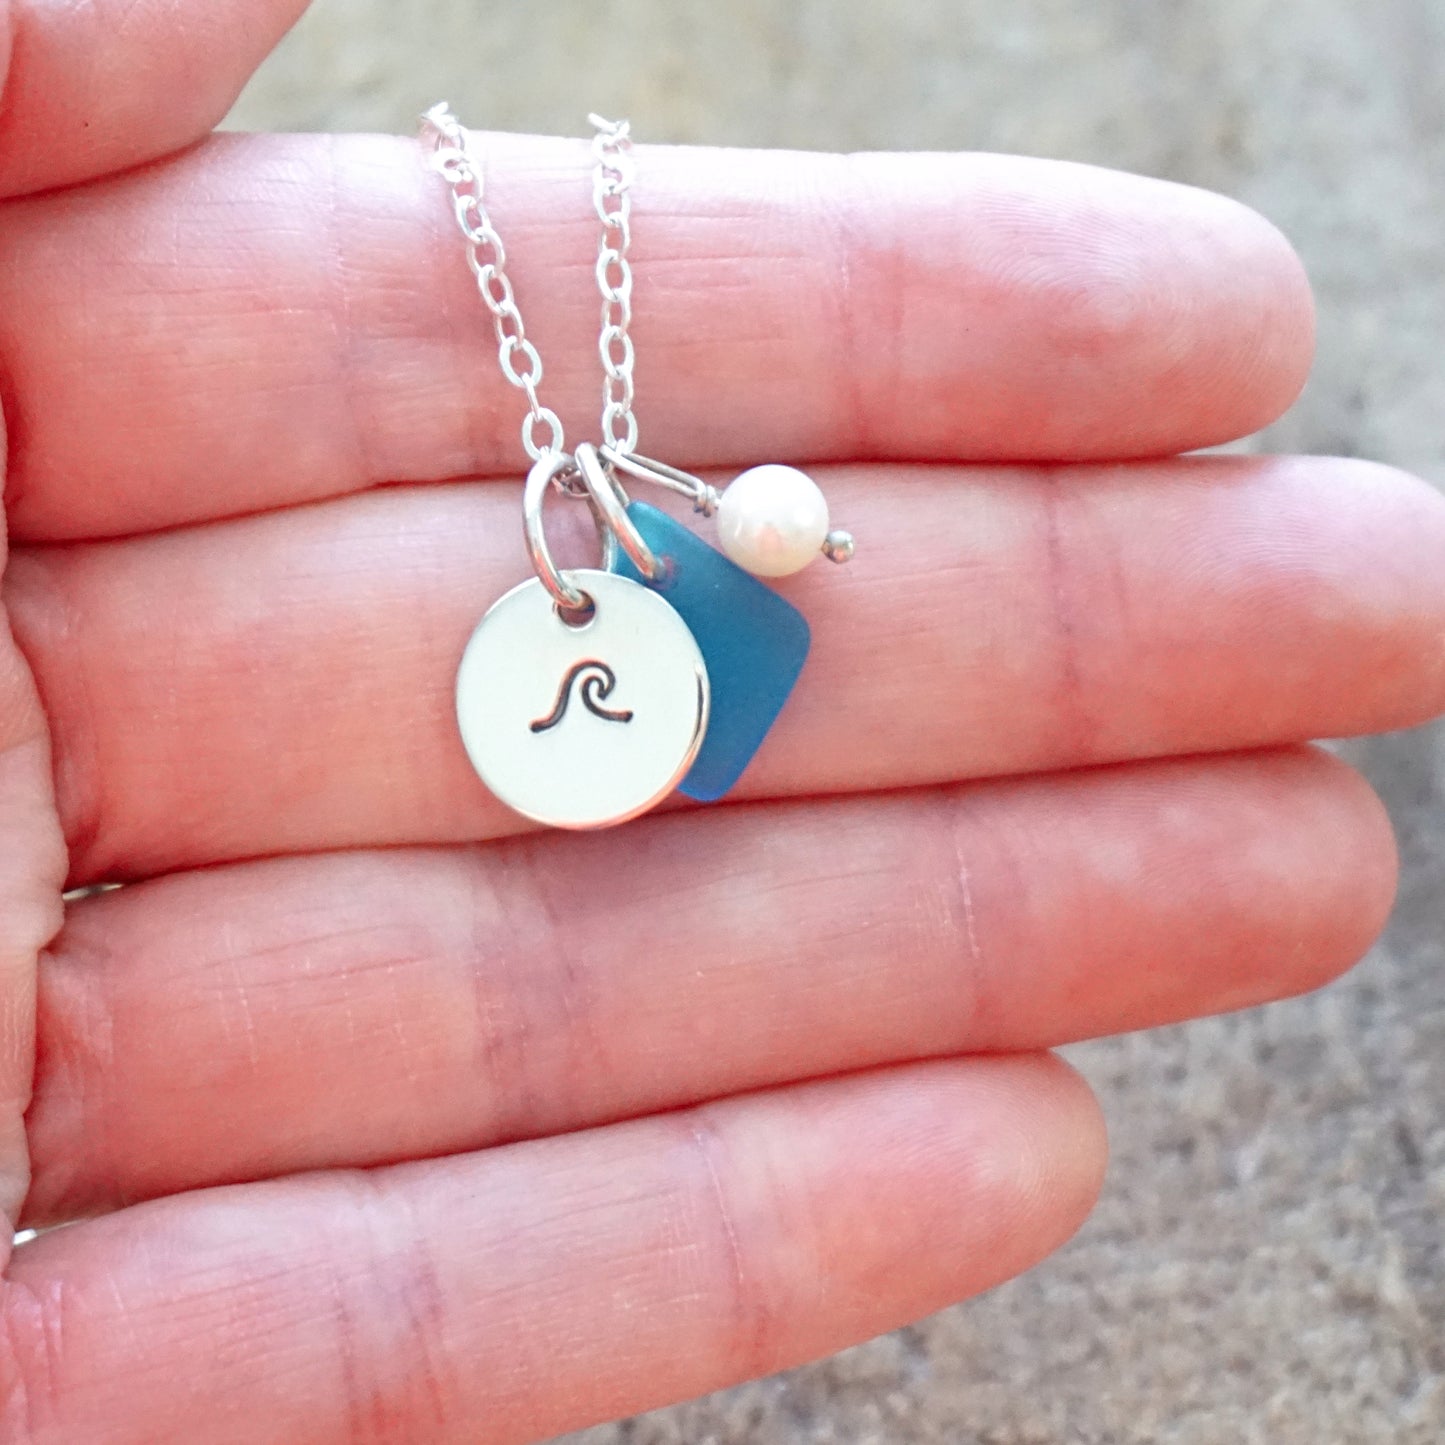 Sterling Silver Wave with Dark Aqua Blue Sea Glass and Pearl Pendant -Handstamped Jewelry, Sterling Silver Jewelry, Surf Jewelry, Nautical